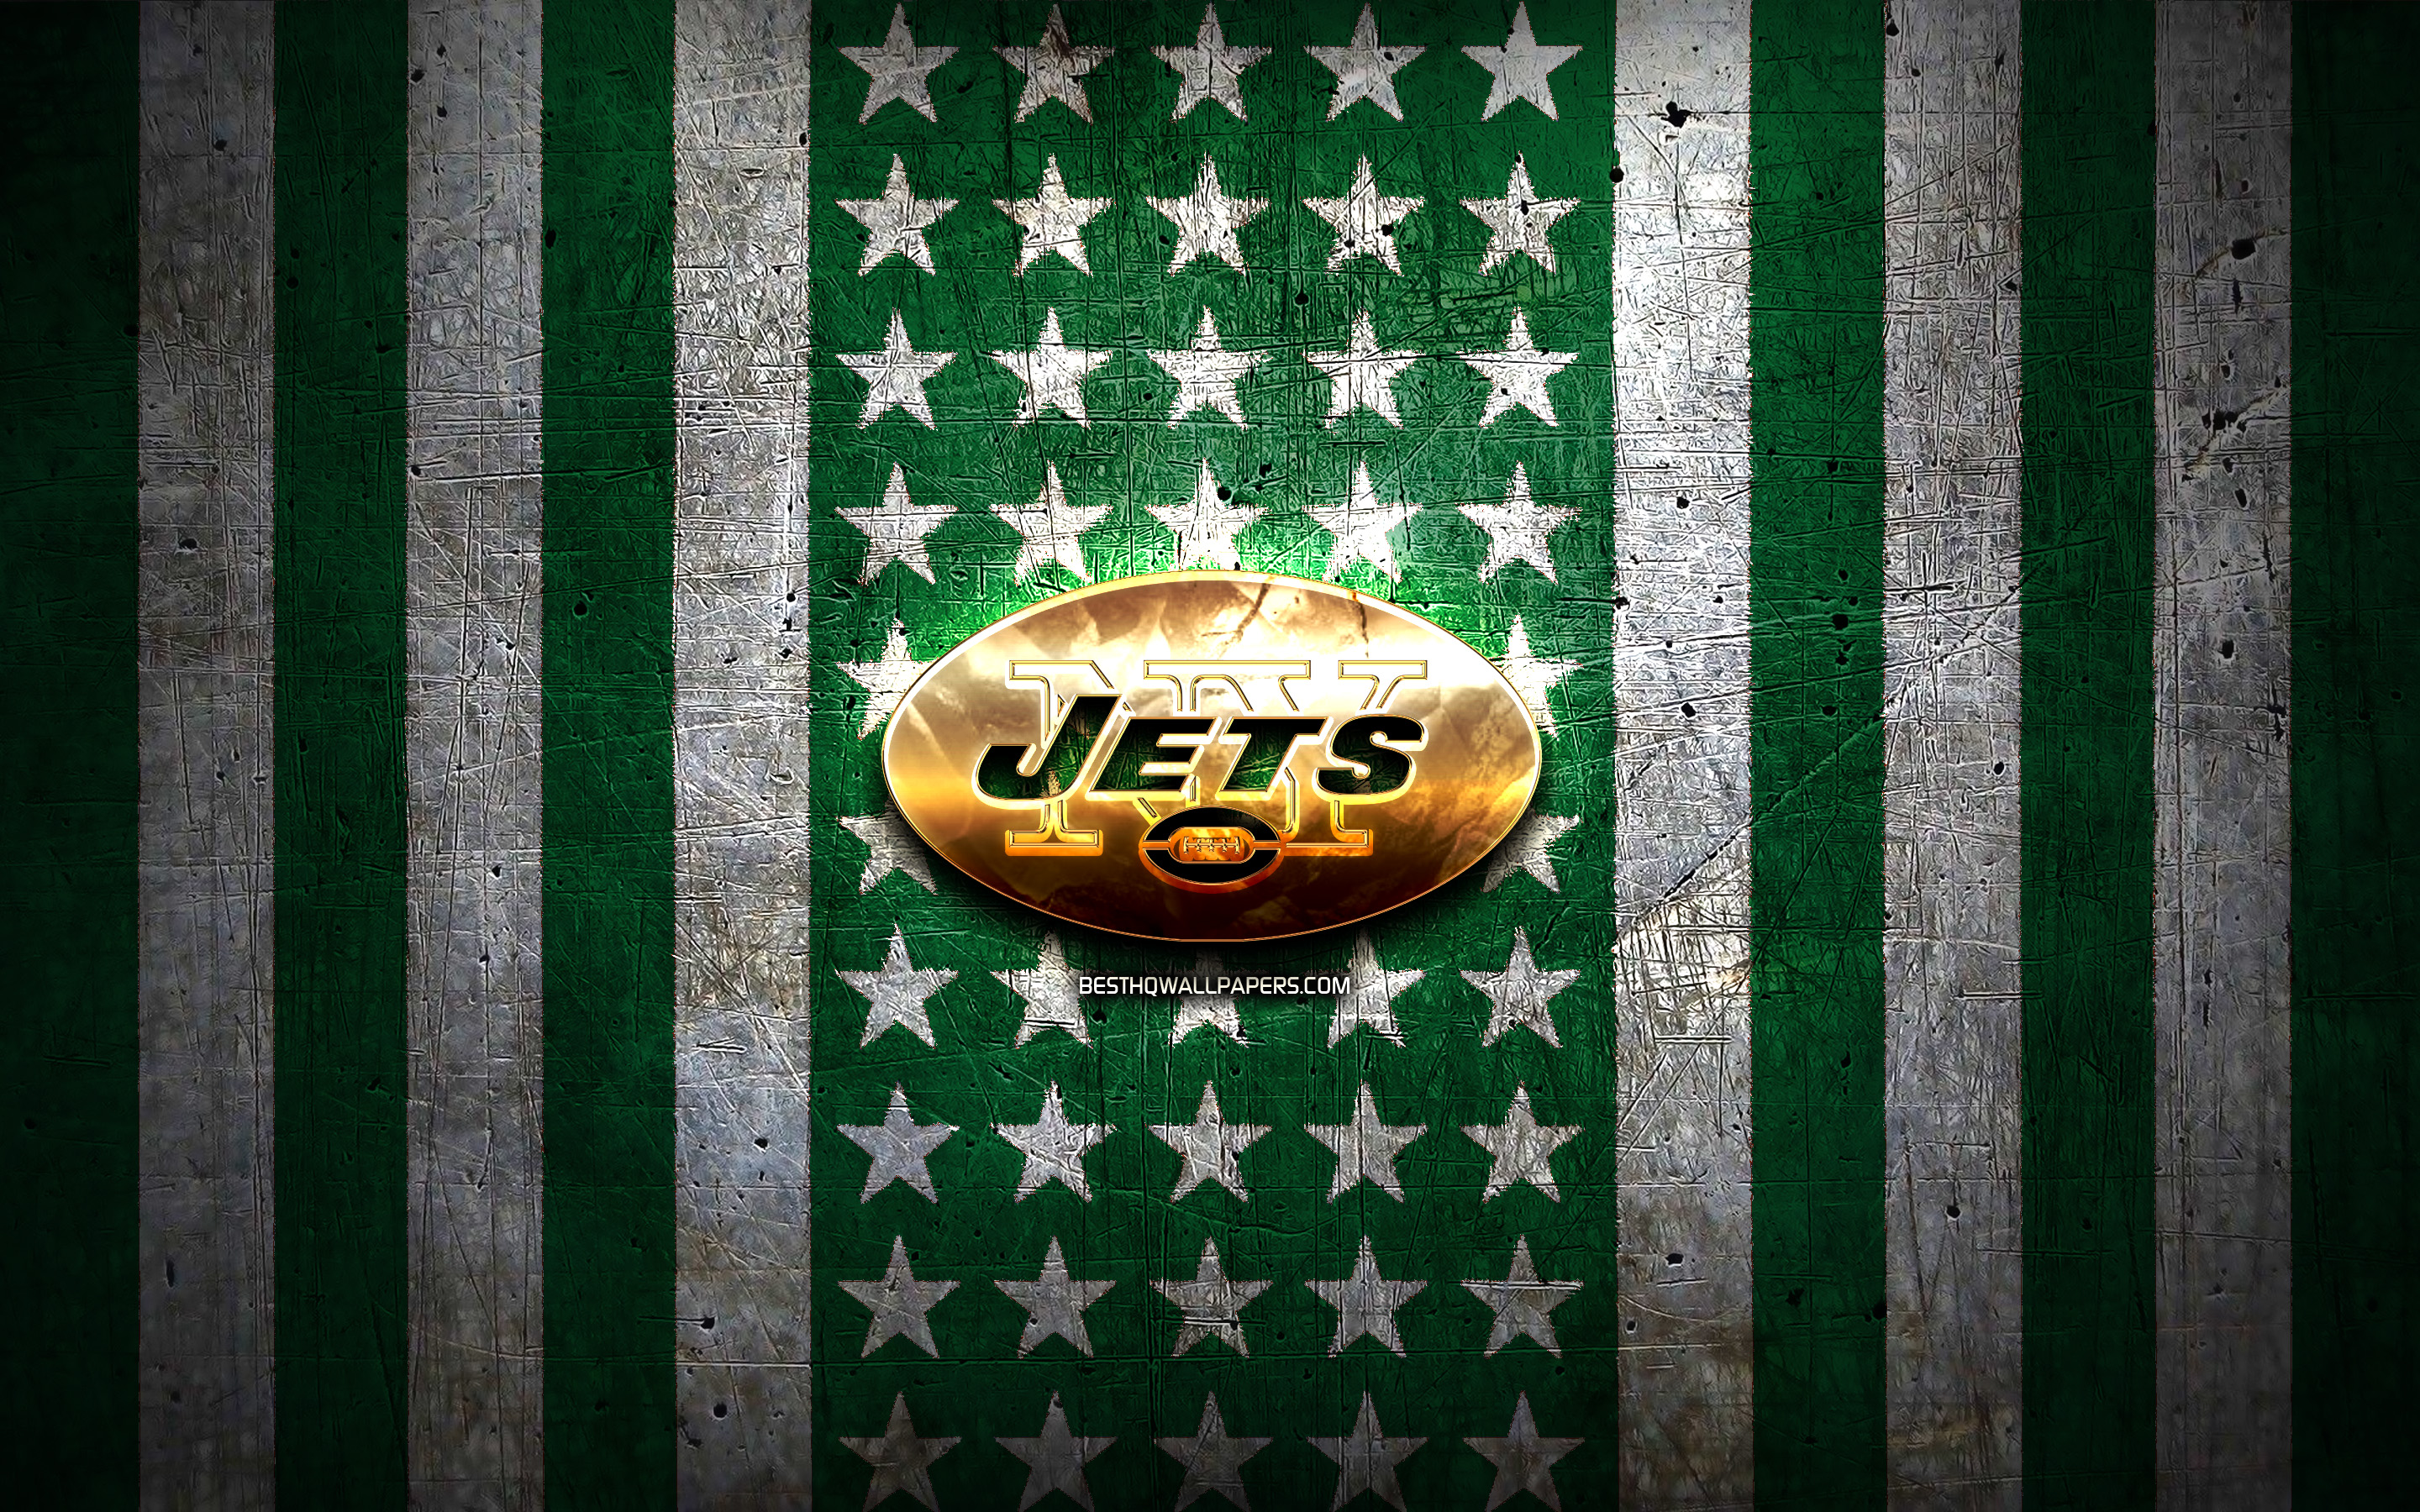 Download wallpapers New York Jets flag NFL green white metal background  american football team New York Jets logo USA american football golden  logo New York Jets NY Jets for desktop with resolution